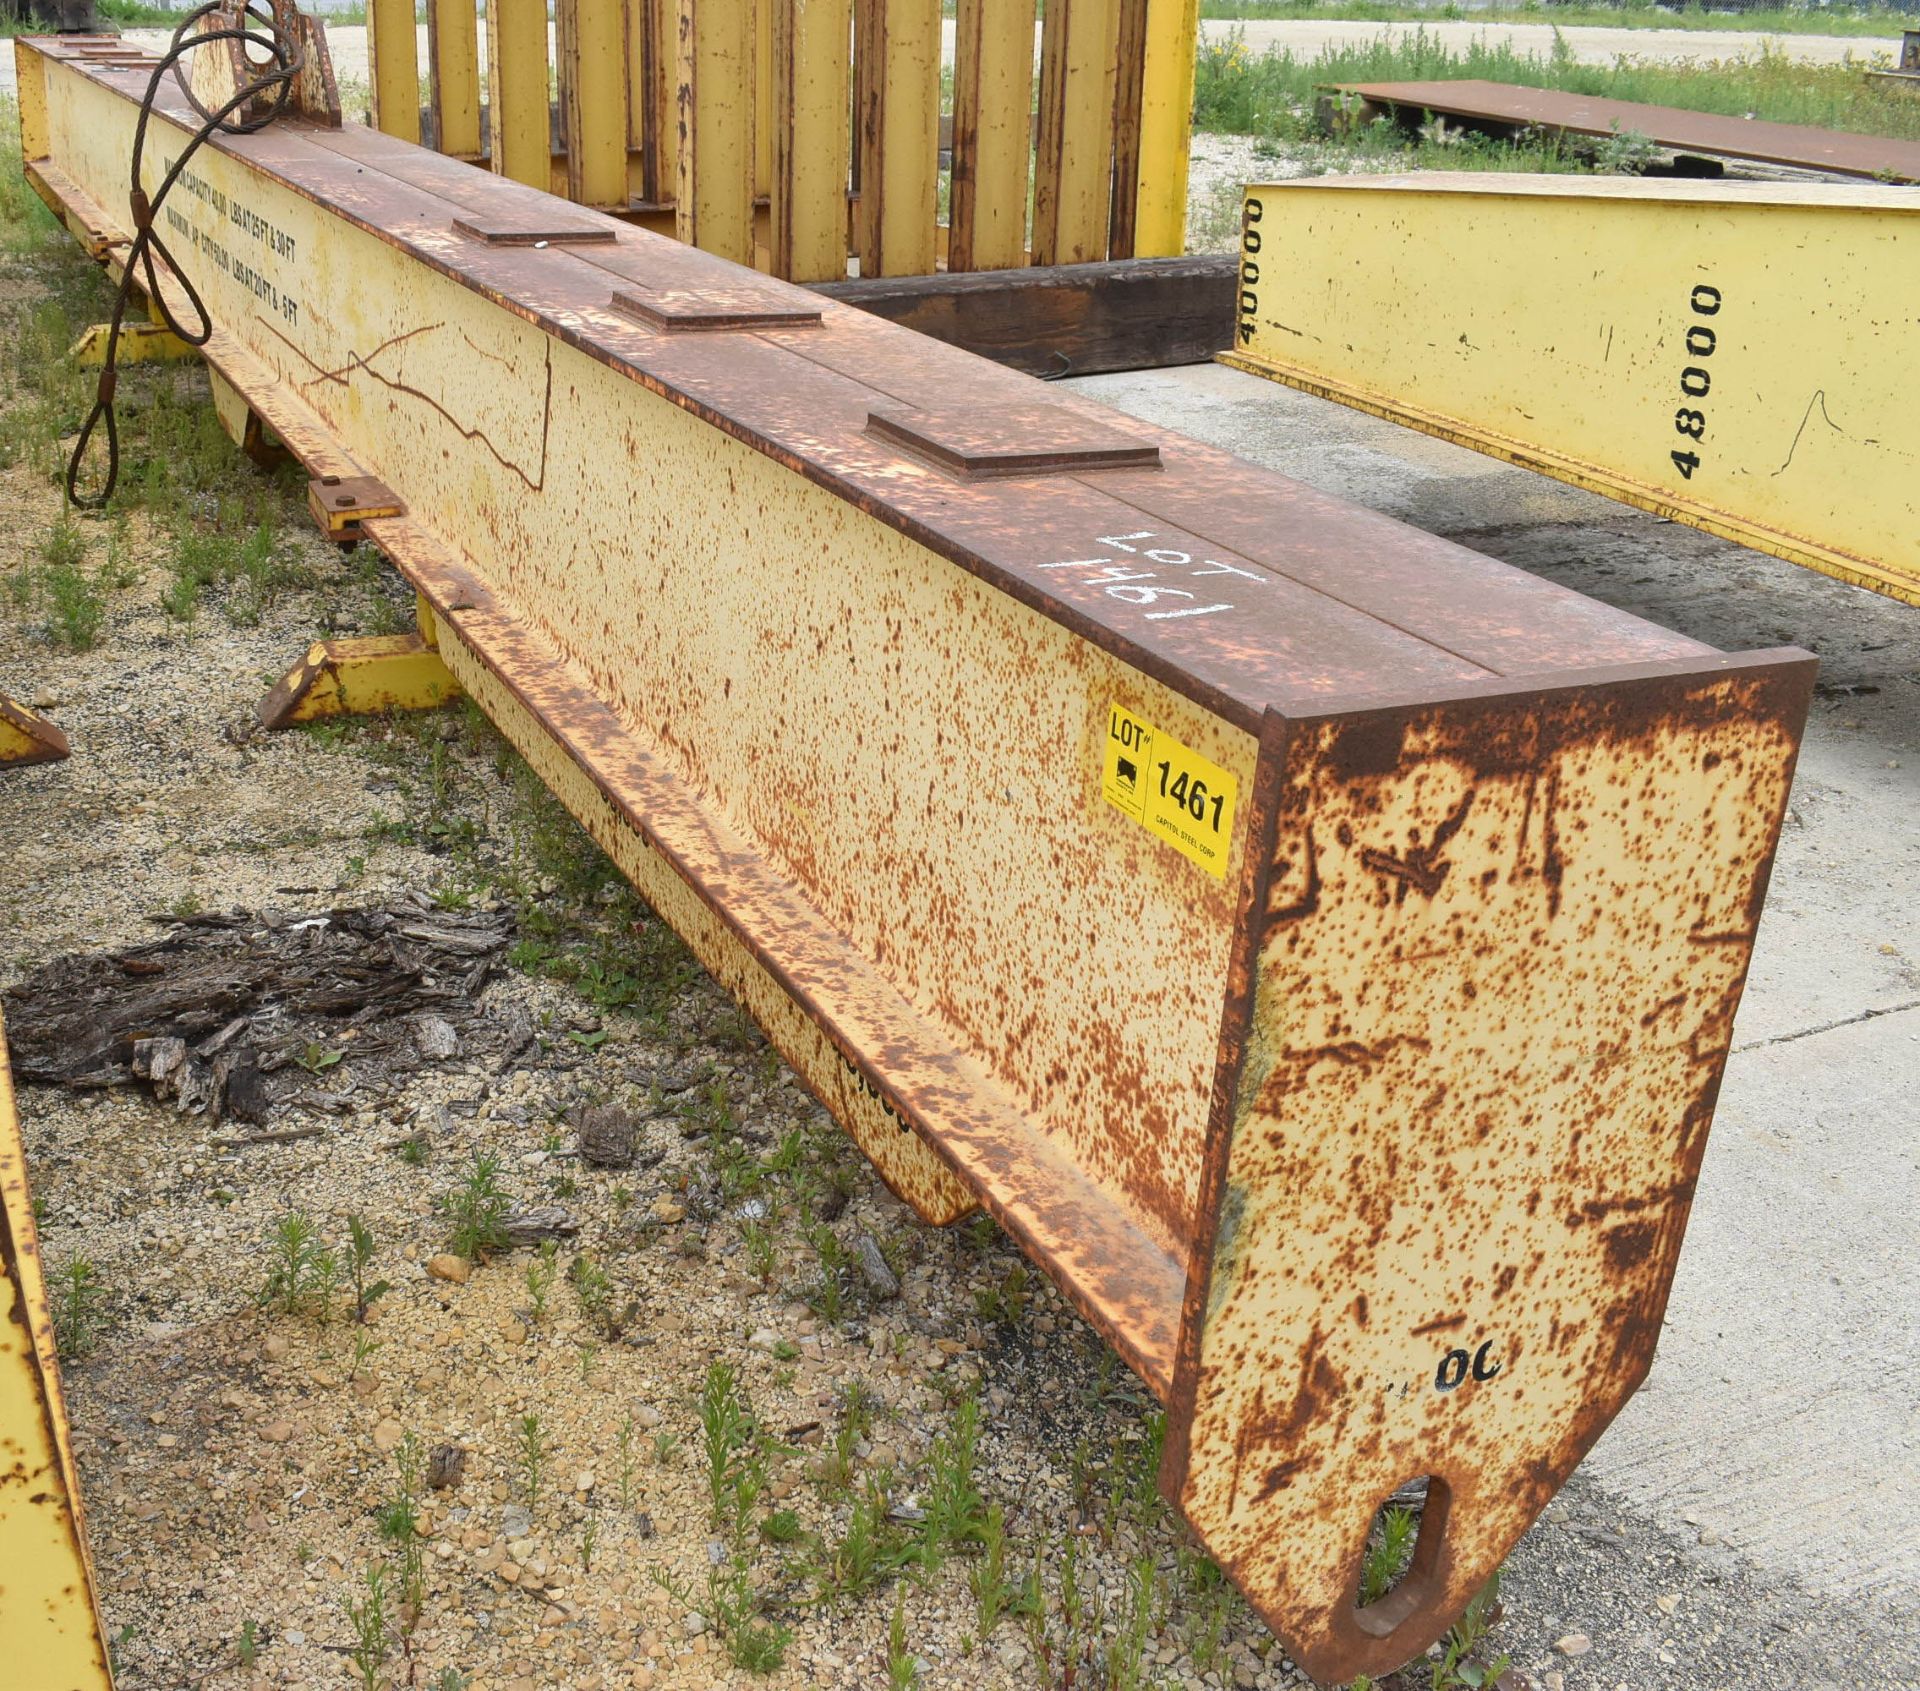 50,000 LB. CAPACITY HEAVY DUTY SPREADER BEAM WITH 30' SPAN (CI) [RIGGING FEES FOR LOT #1461 - $150